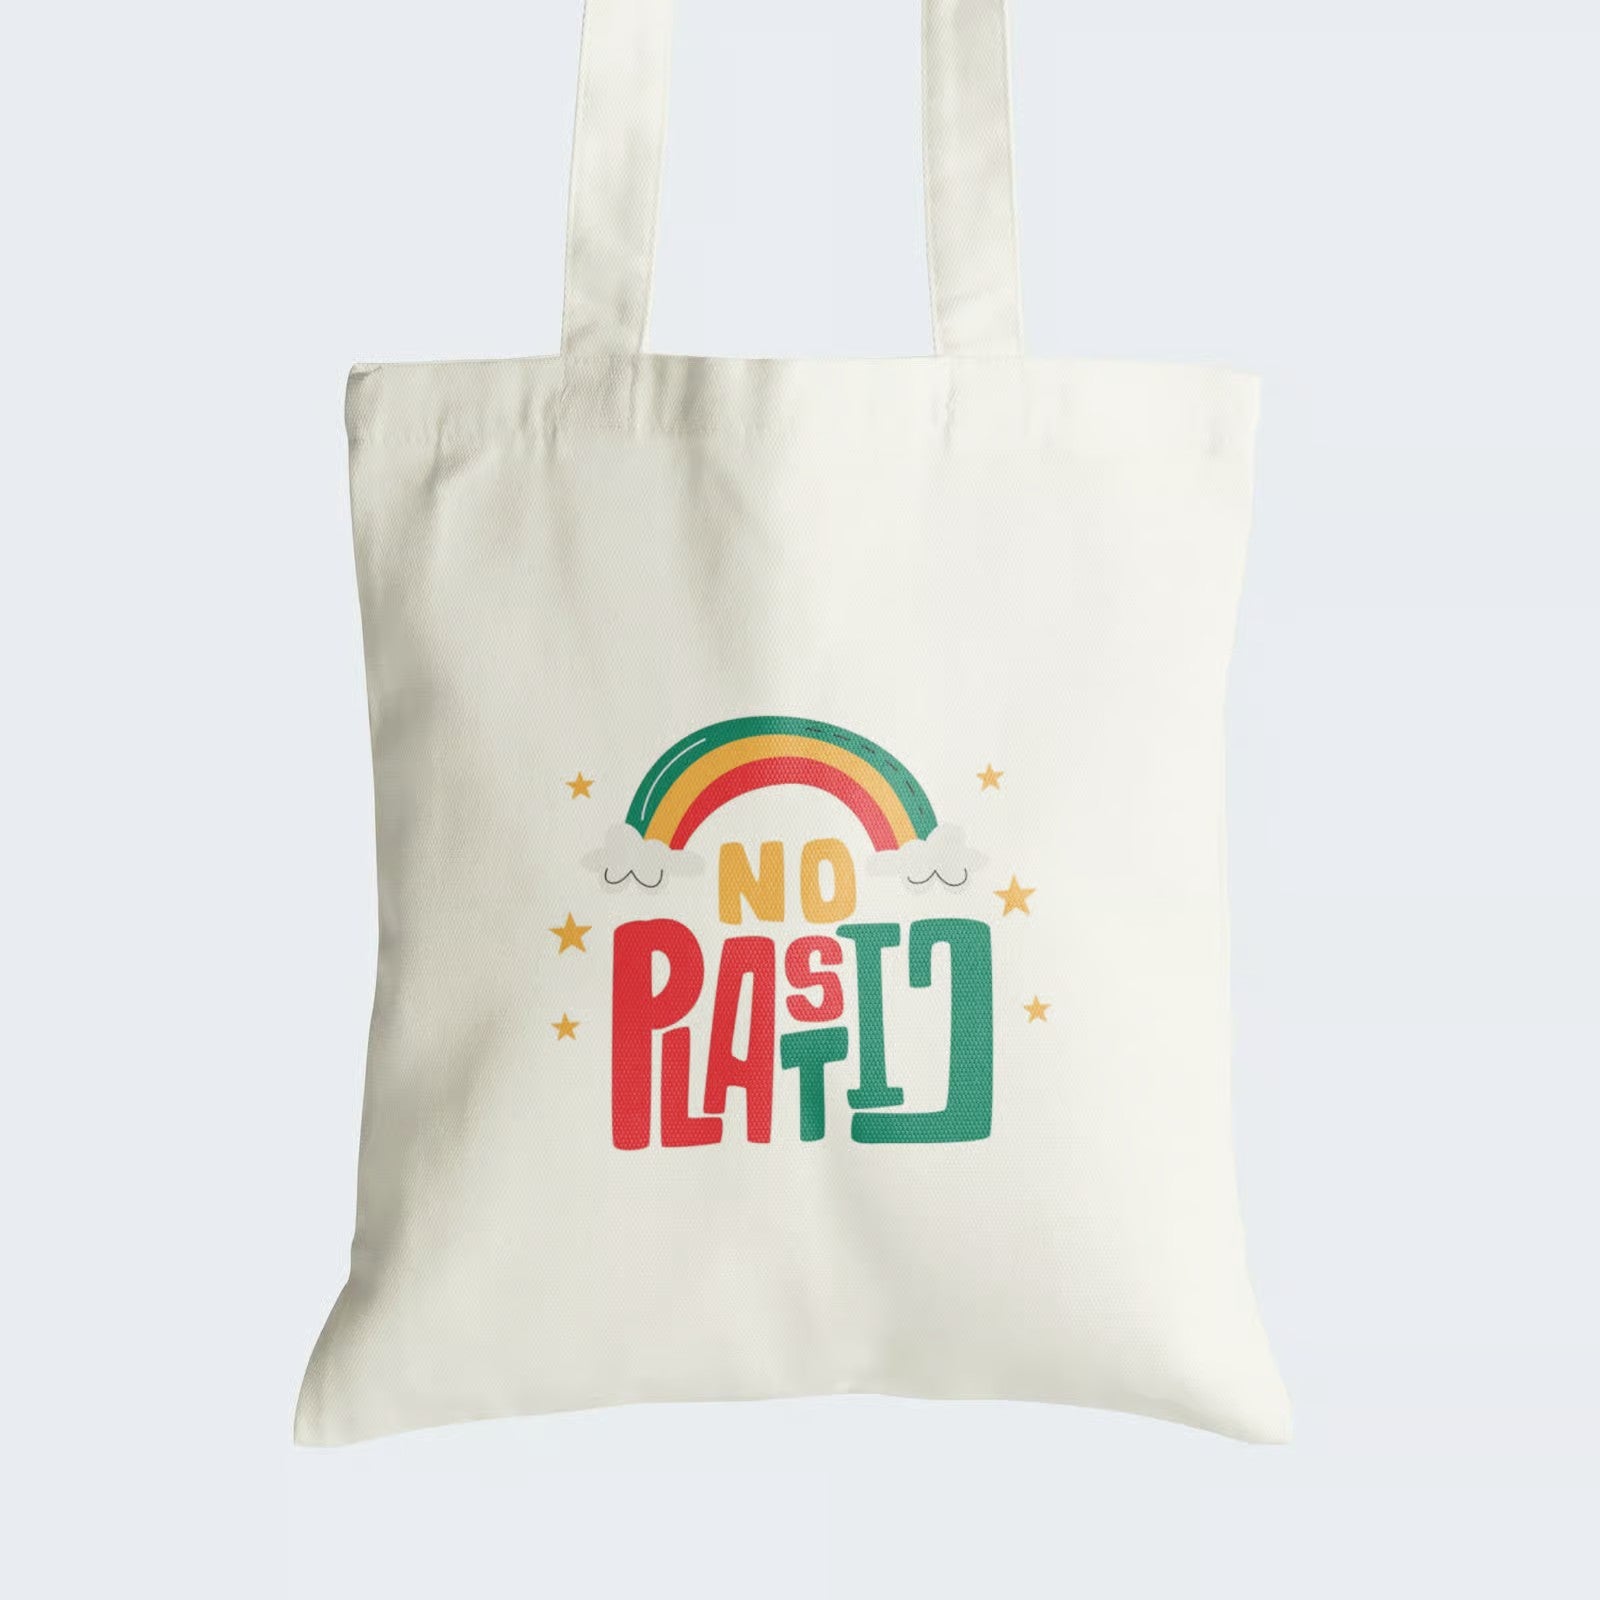 Elevate your style while championing an eco-conscious world with our "NO PLASTIC" Cotton Canvas Tote Bag. This tote features a striking graphic design with "NO PLASTIC" boldly written, complemented by a vibrant rainbow, symbolizing a plastic-free future. Crafted for both durability and style, it includes a secure zipper closure for daily convenience. Carry the message of environmental responsibility with our impactful Cotton Canvas Tote Bag. Order yours today and be part of the change!